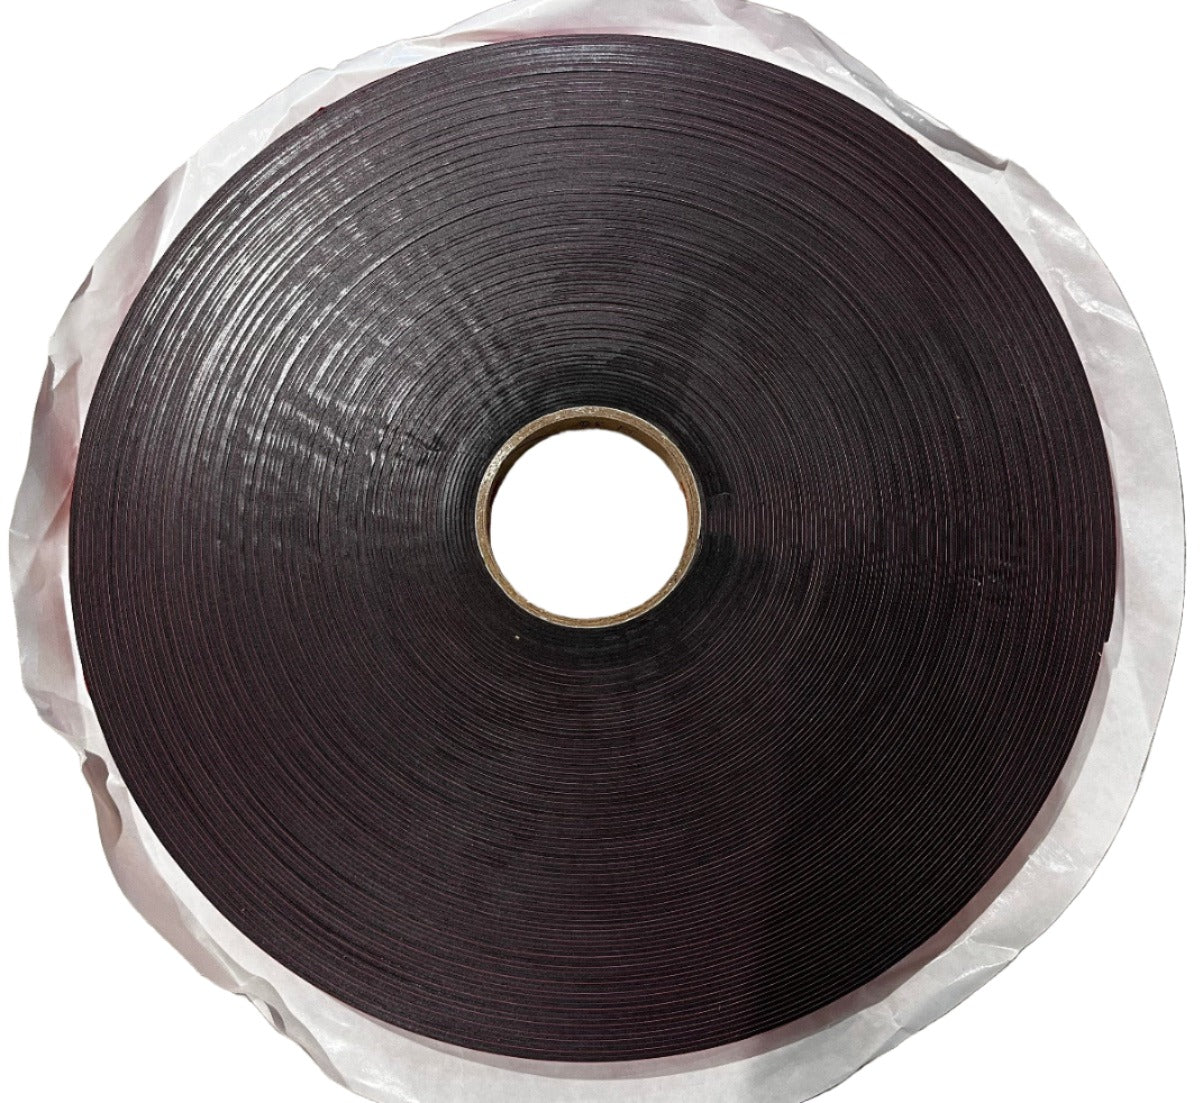 Airstream Double Coated Tape, 108 Foot Roll - 365222